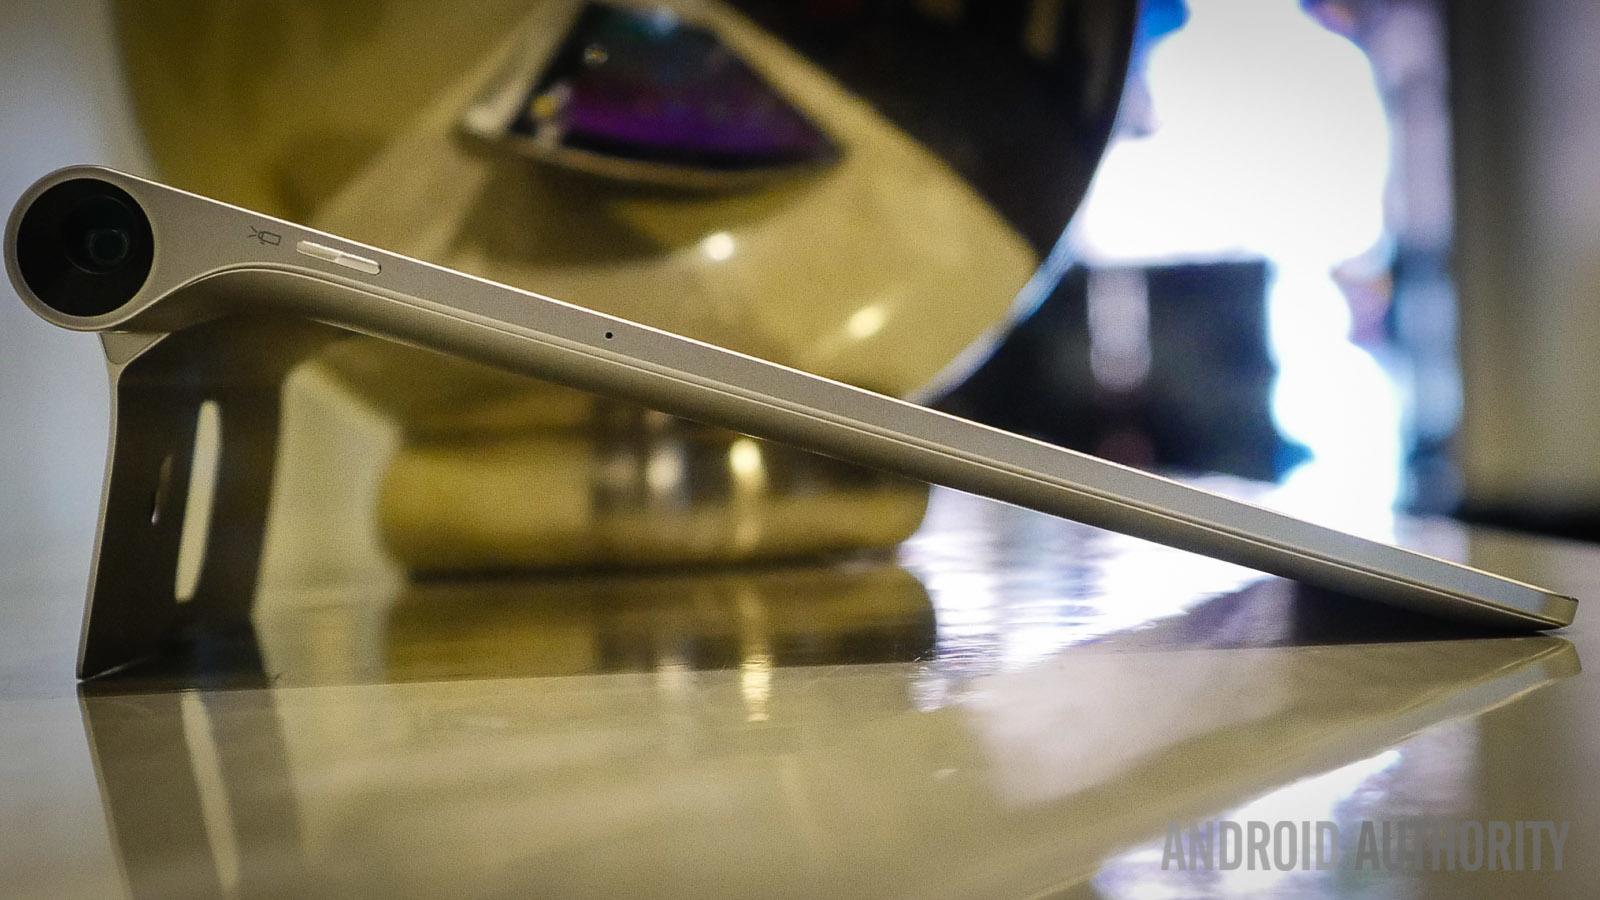 lenovo yoga tablet 2 pro first look aa (7 of 19)